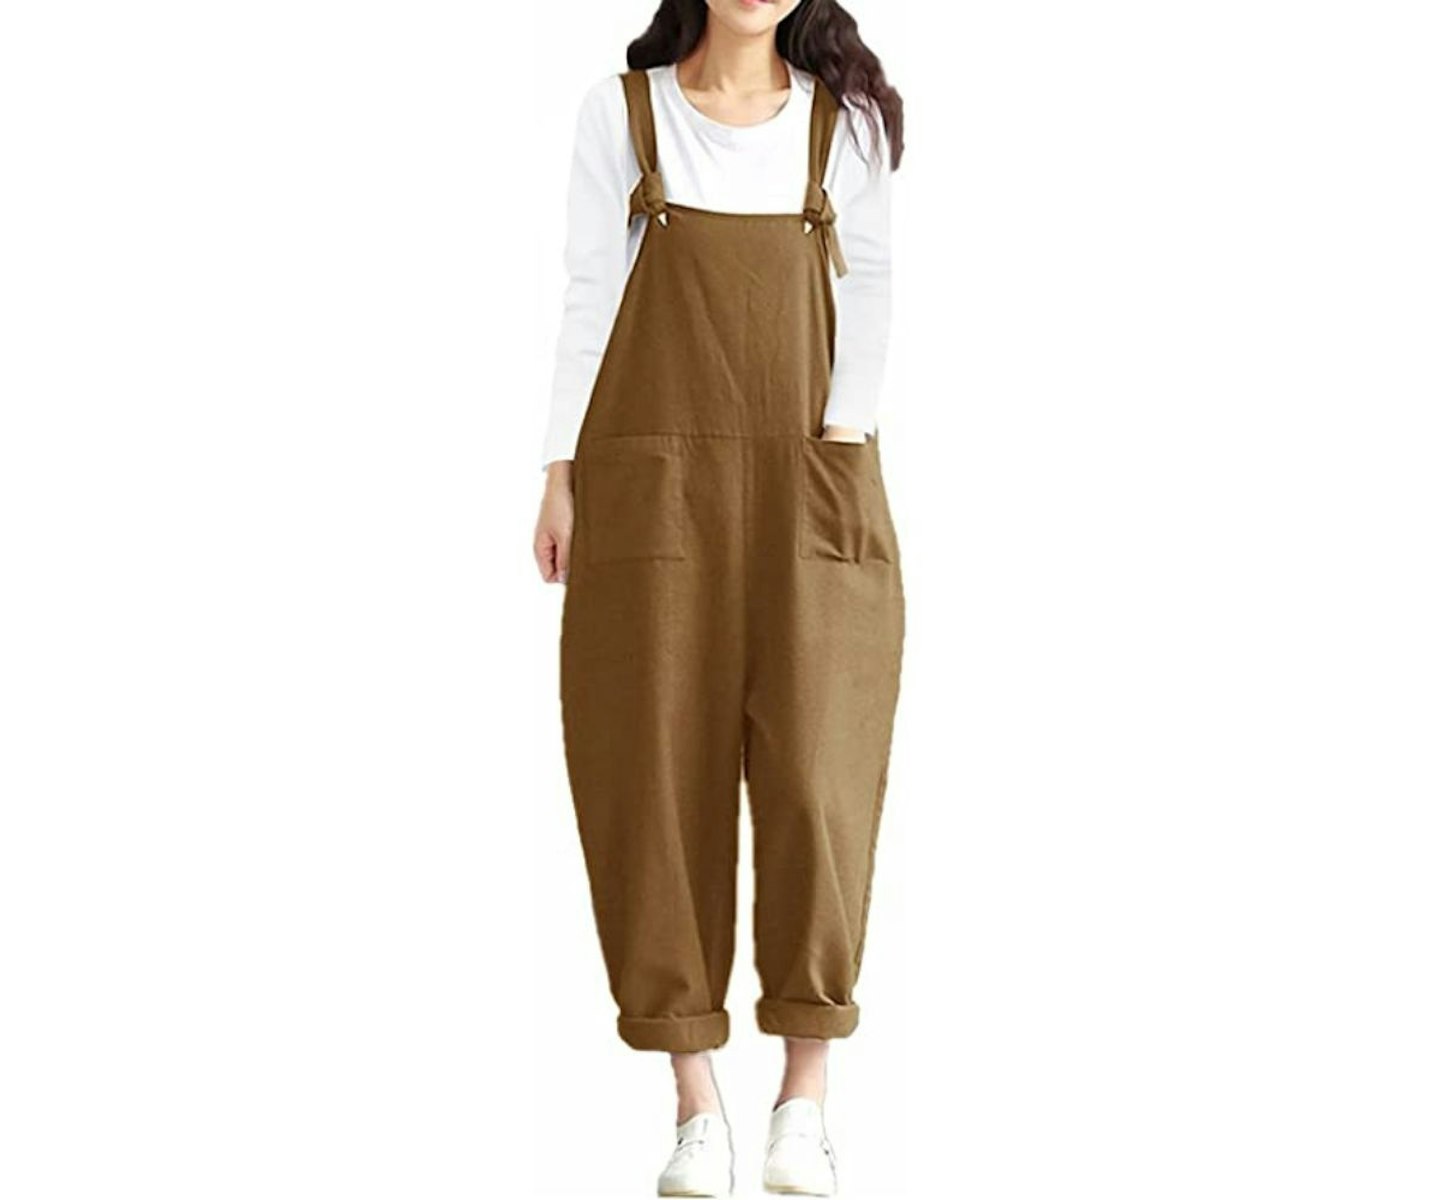 Style Dome Women's Dungarees